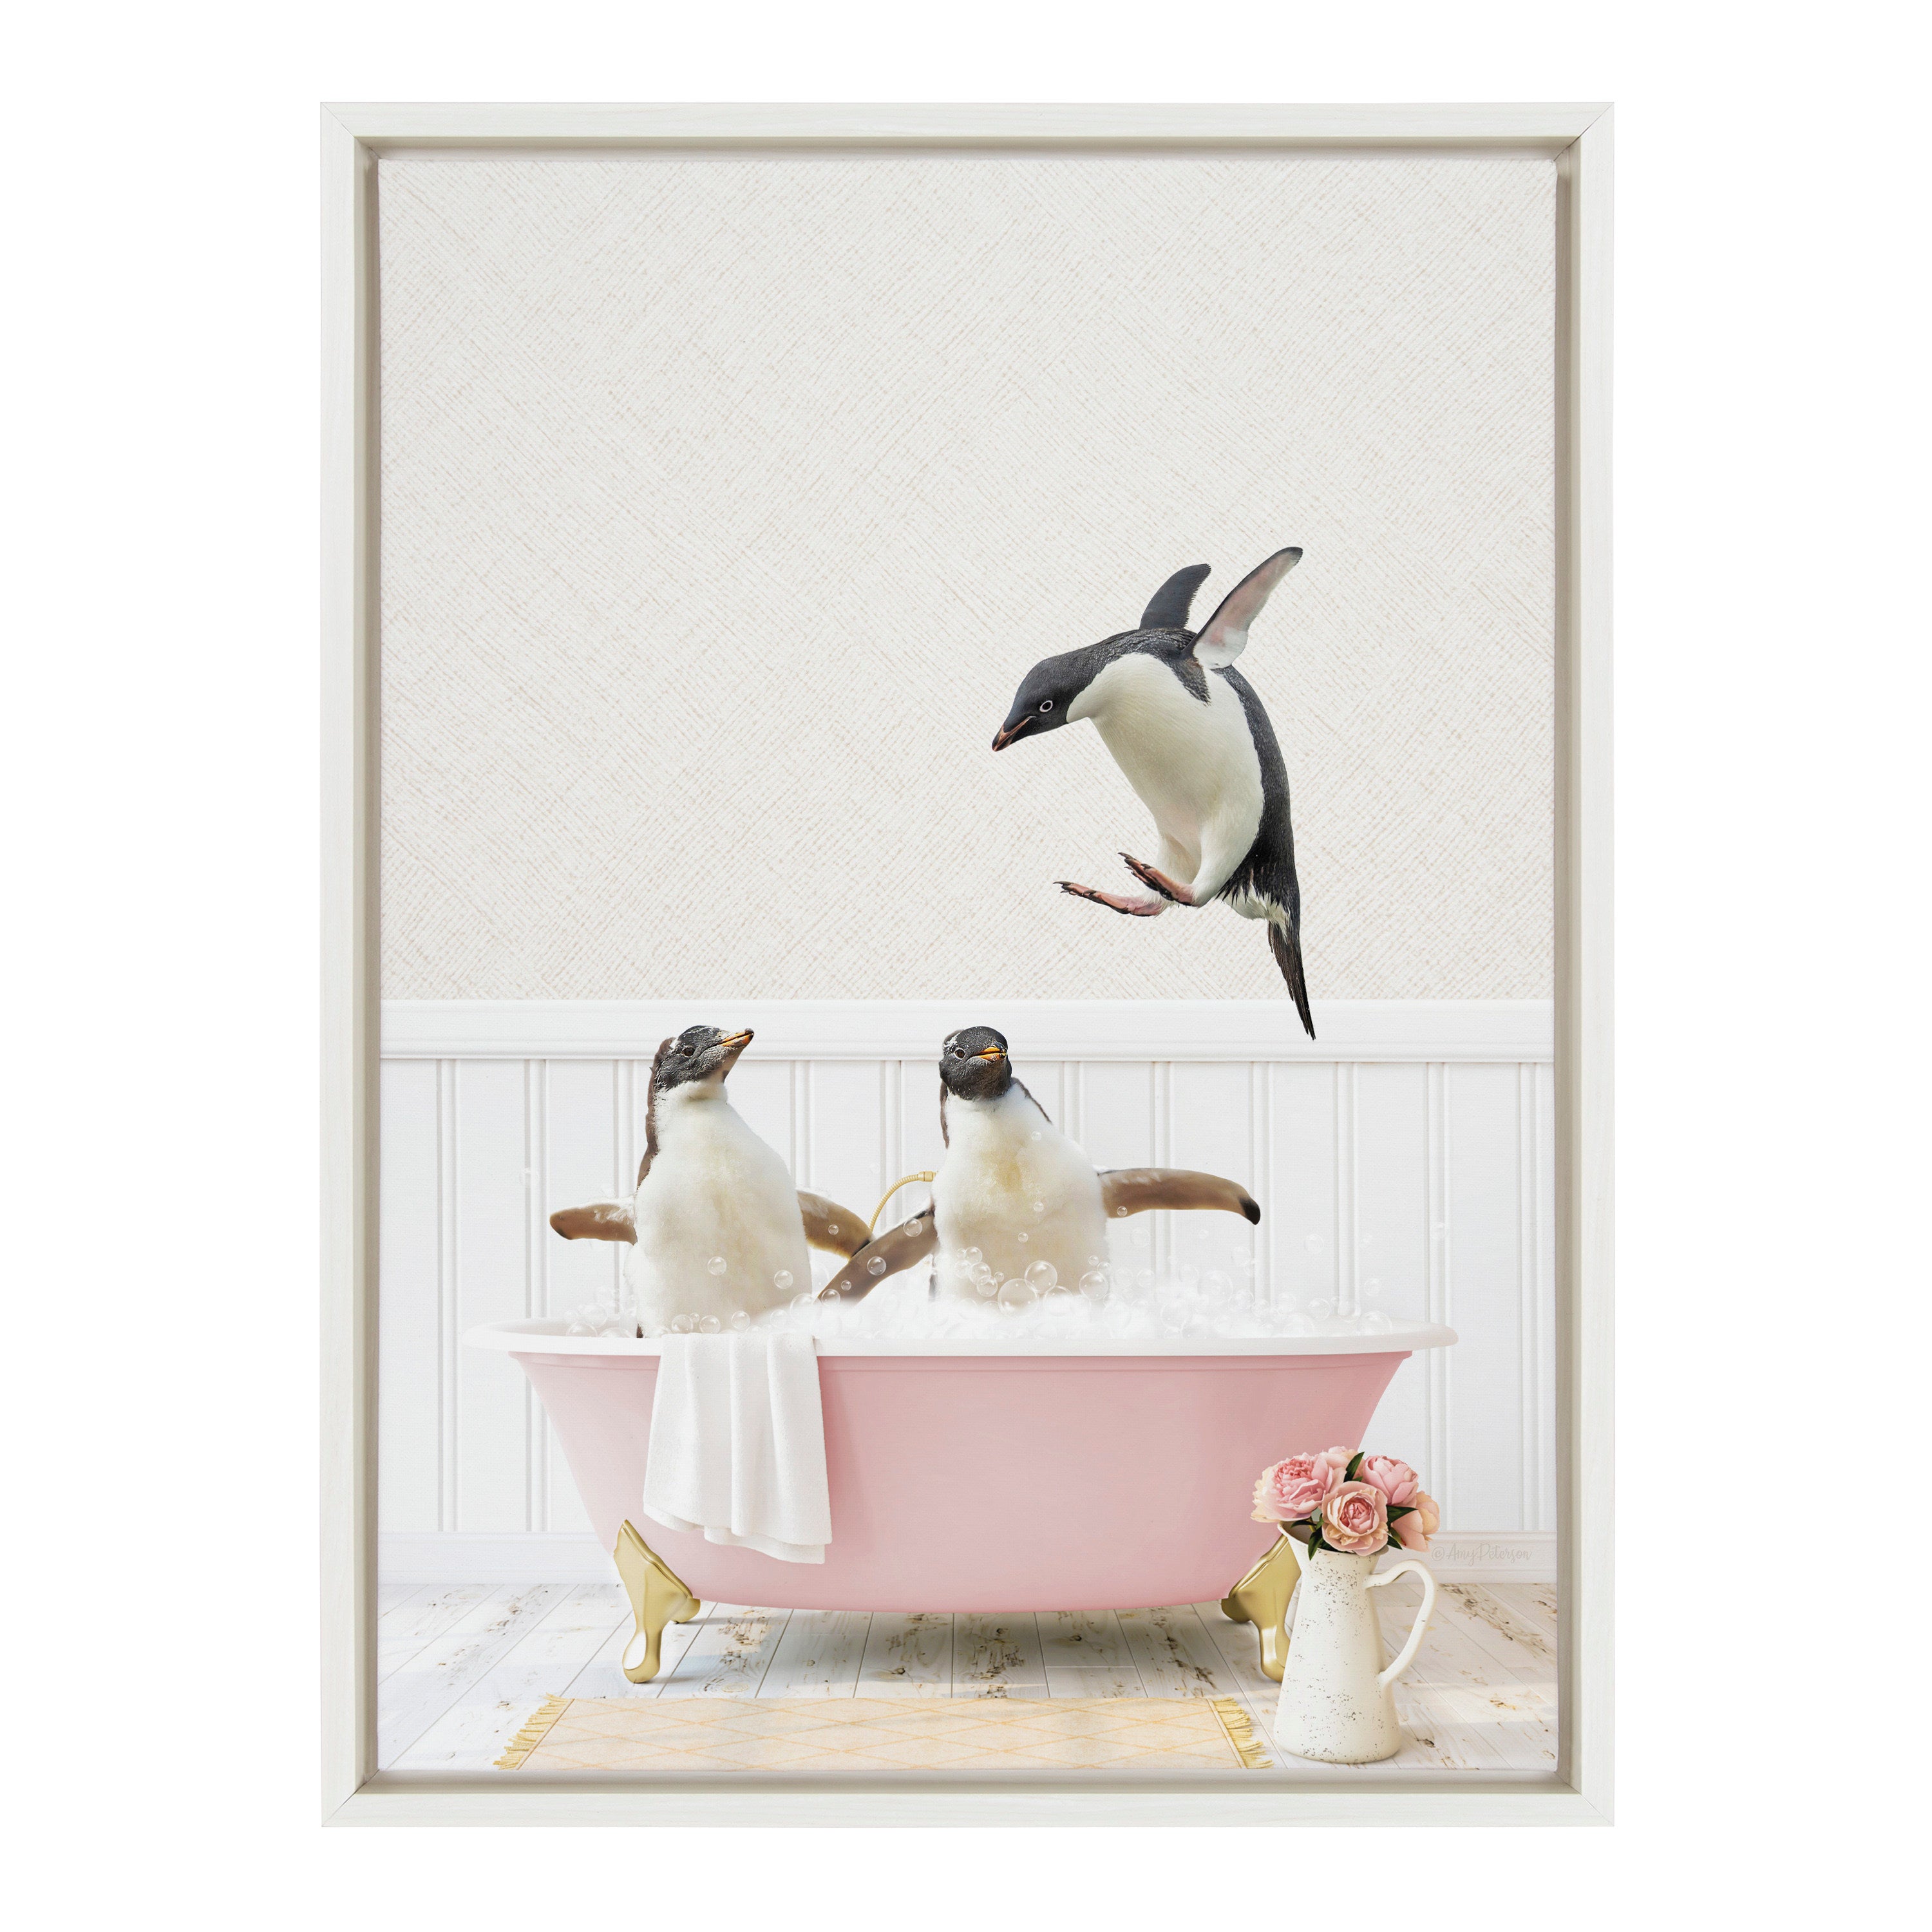 Sylvie Penguins Playing in Cottage Rose Bath Framed Canvas by Amy Peterson Art Studio